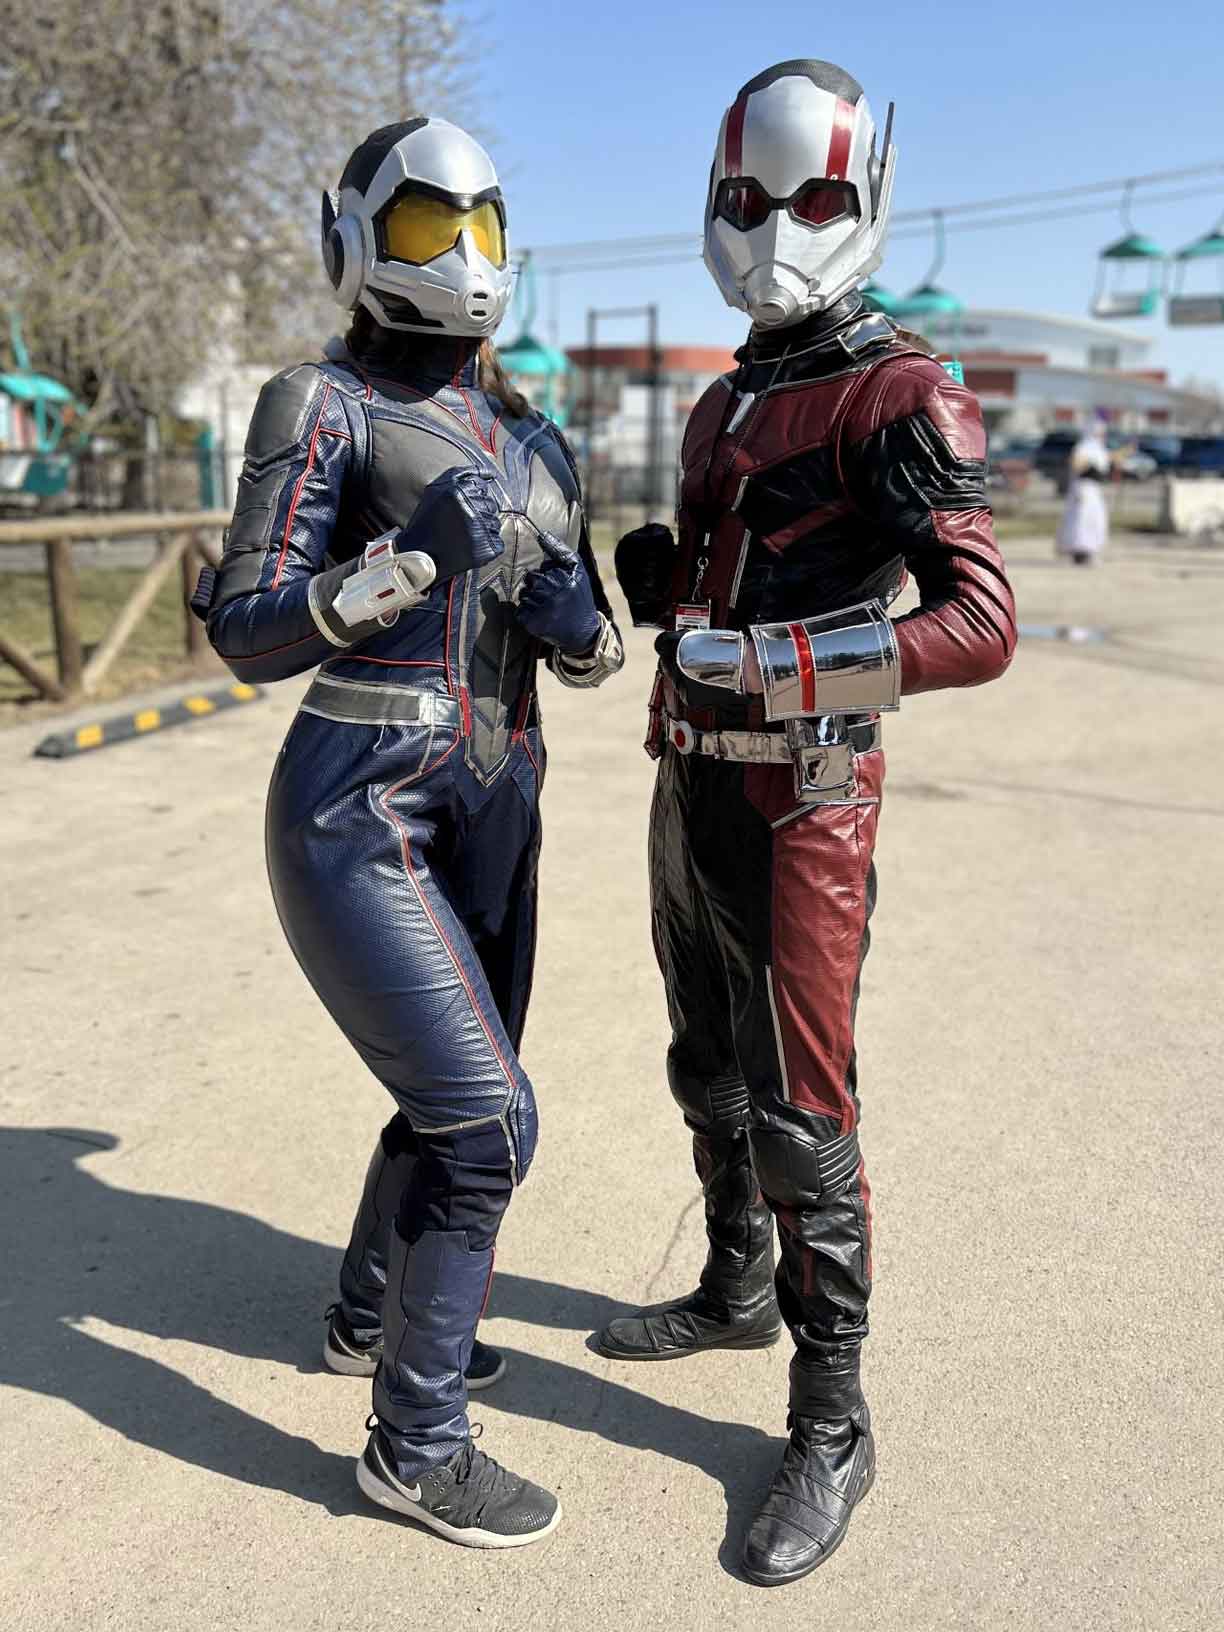 Antman and the Wasp Calgary Expo 2022 Cosplay